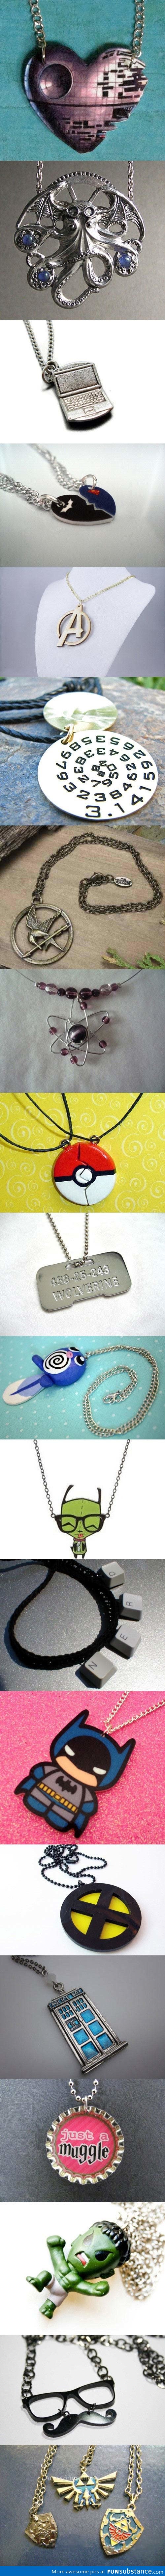 A collection of 20 cool and creative necklaces for geeks